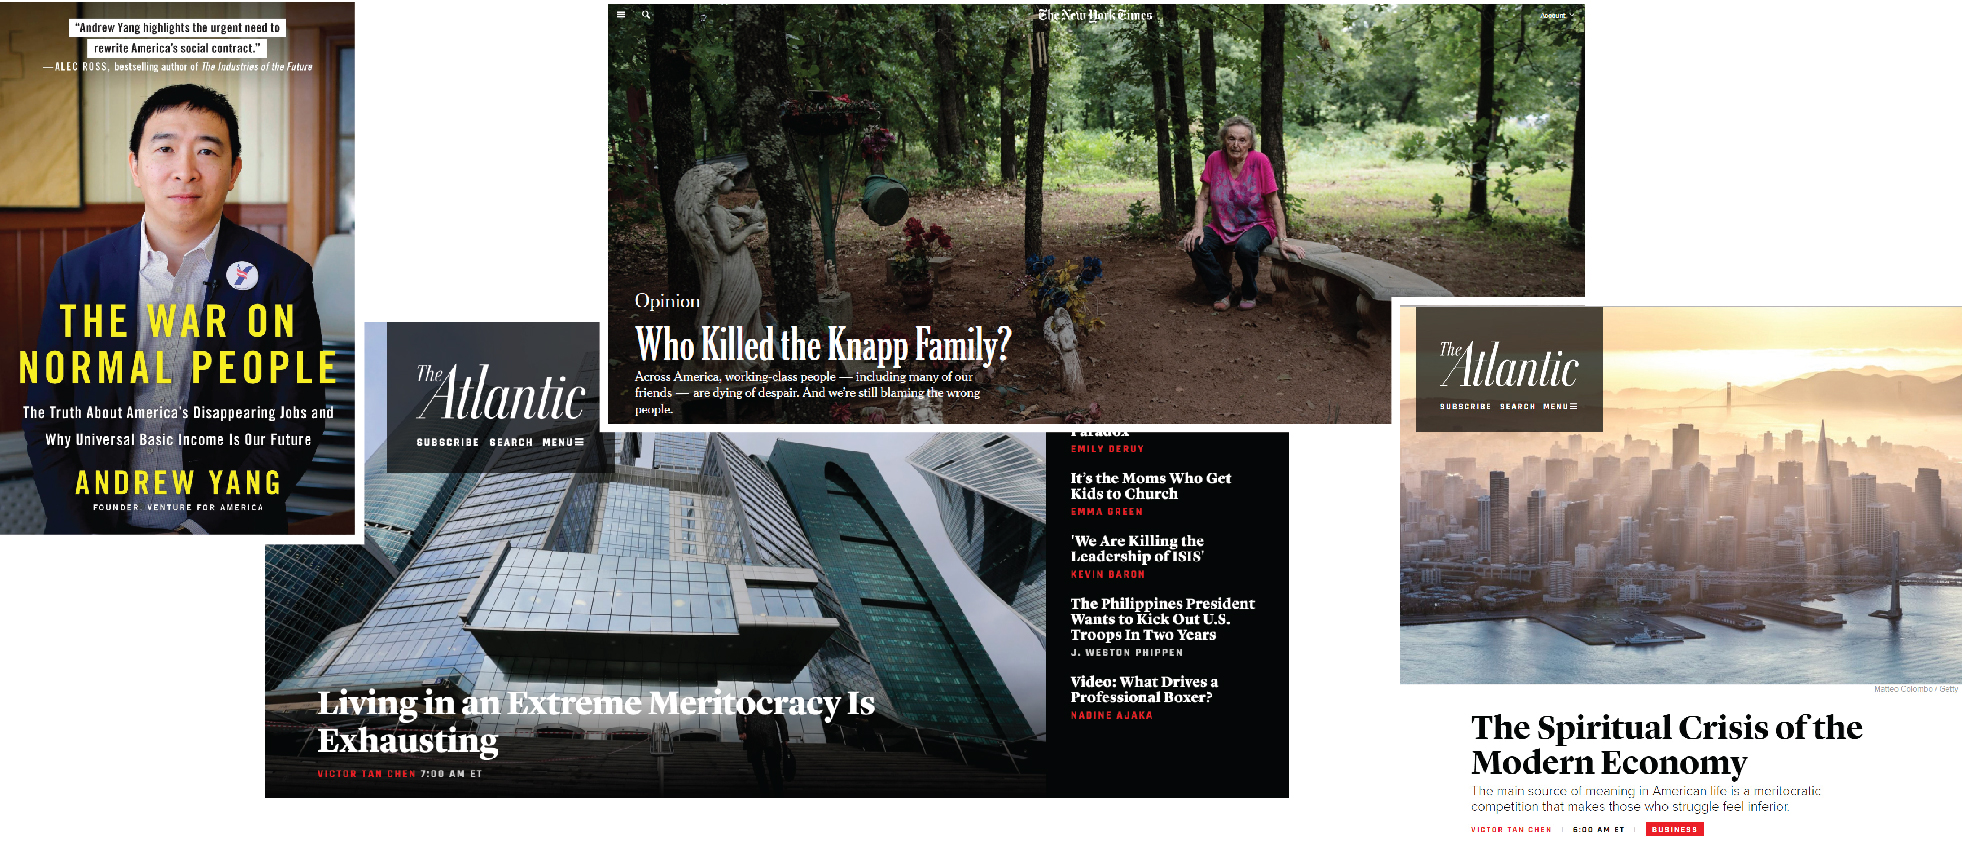 Articles and books that mentioned Victor Chen’s scholarly work: Nicholas Kristof and Sheryl WuDunn, “Who Killed the Knapp Family?” New York Times, January 9, 2020; Andrew Yang, “The War on Normal People: The Truth about America’s Disappearing Jobs and Why Universal Basic Income Is Our Future” (Hachette Books, 2018); Victor Tan Chen, “The Spiritual Crisis of the Modern Economy,” The Atlantic, December 21, 2016; Victor Tan Chen, “Living in an Extreme Meritocracy Is Exhausting,” The Atlantic, October 26, 2016.